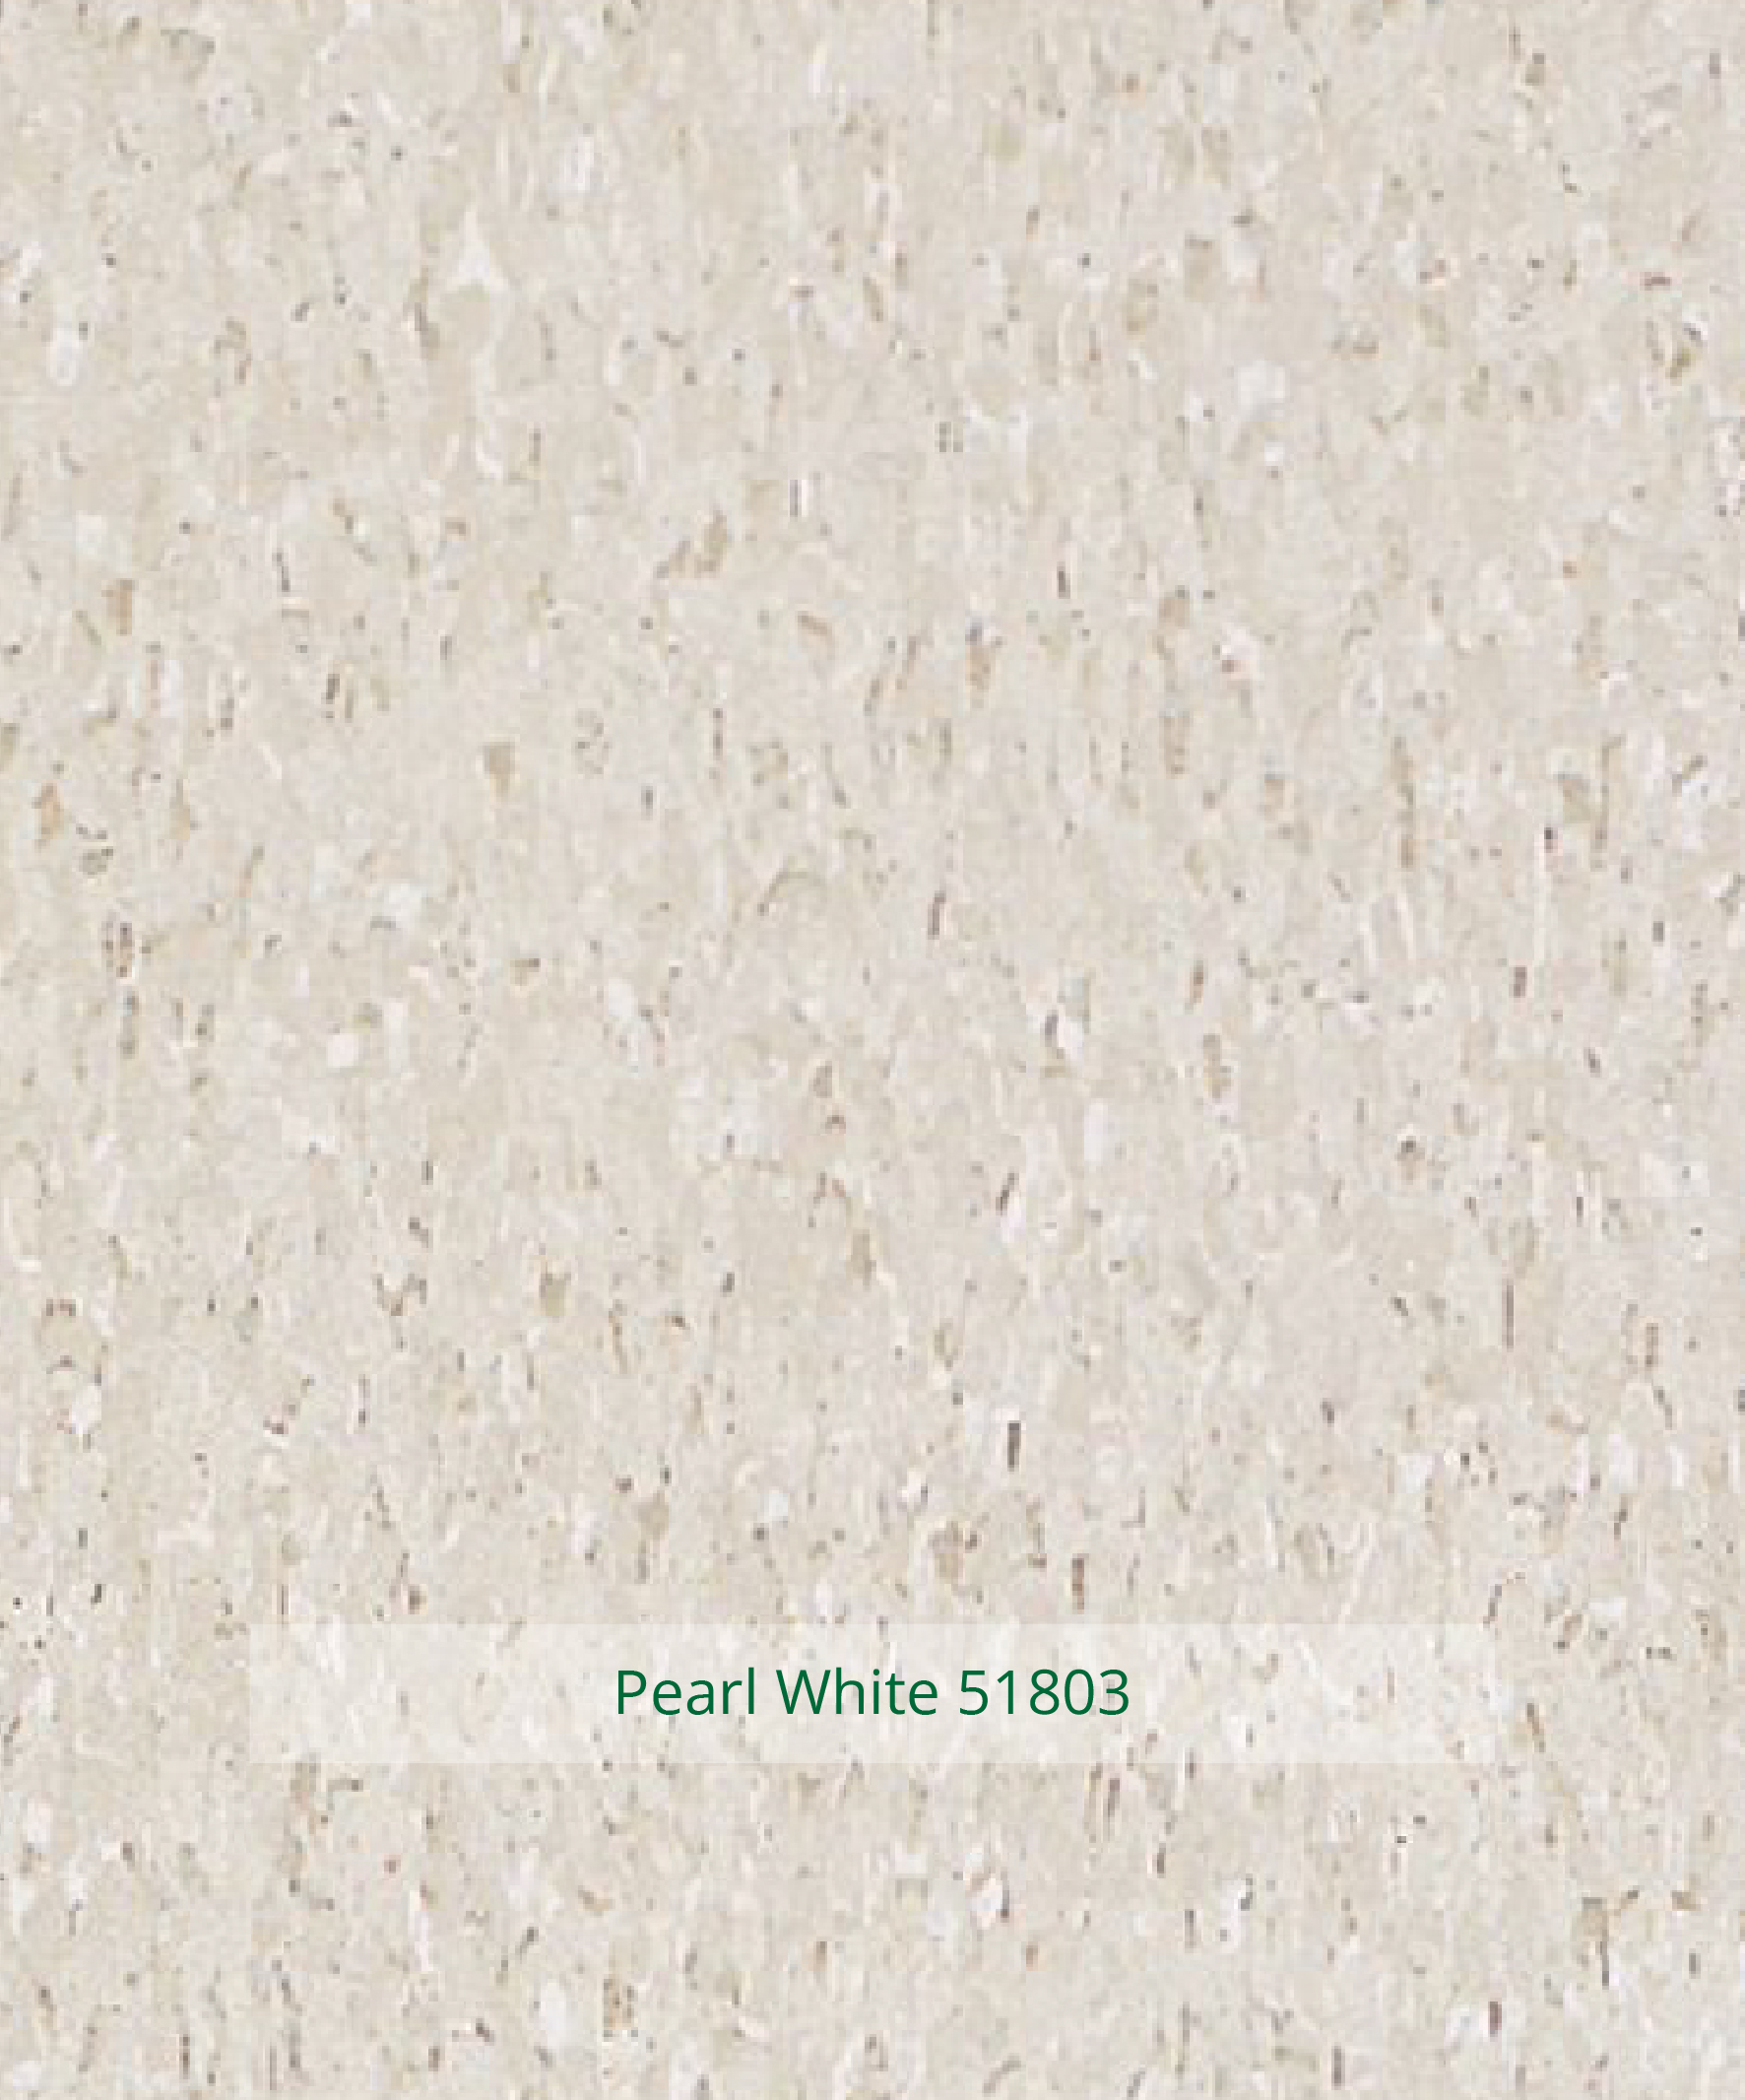 Standard EXCELON Imperial Series Pearl White 51803a